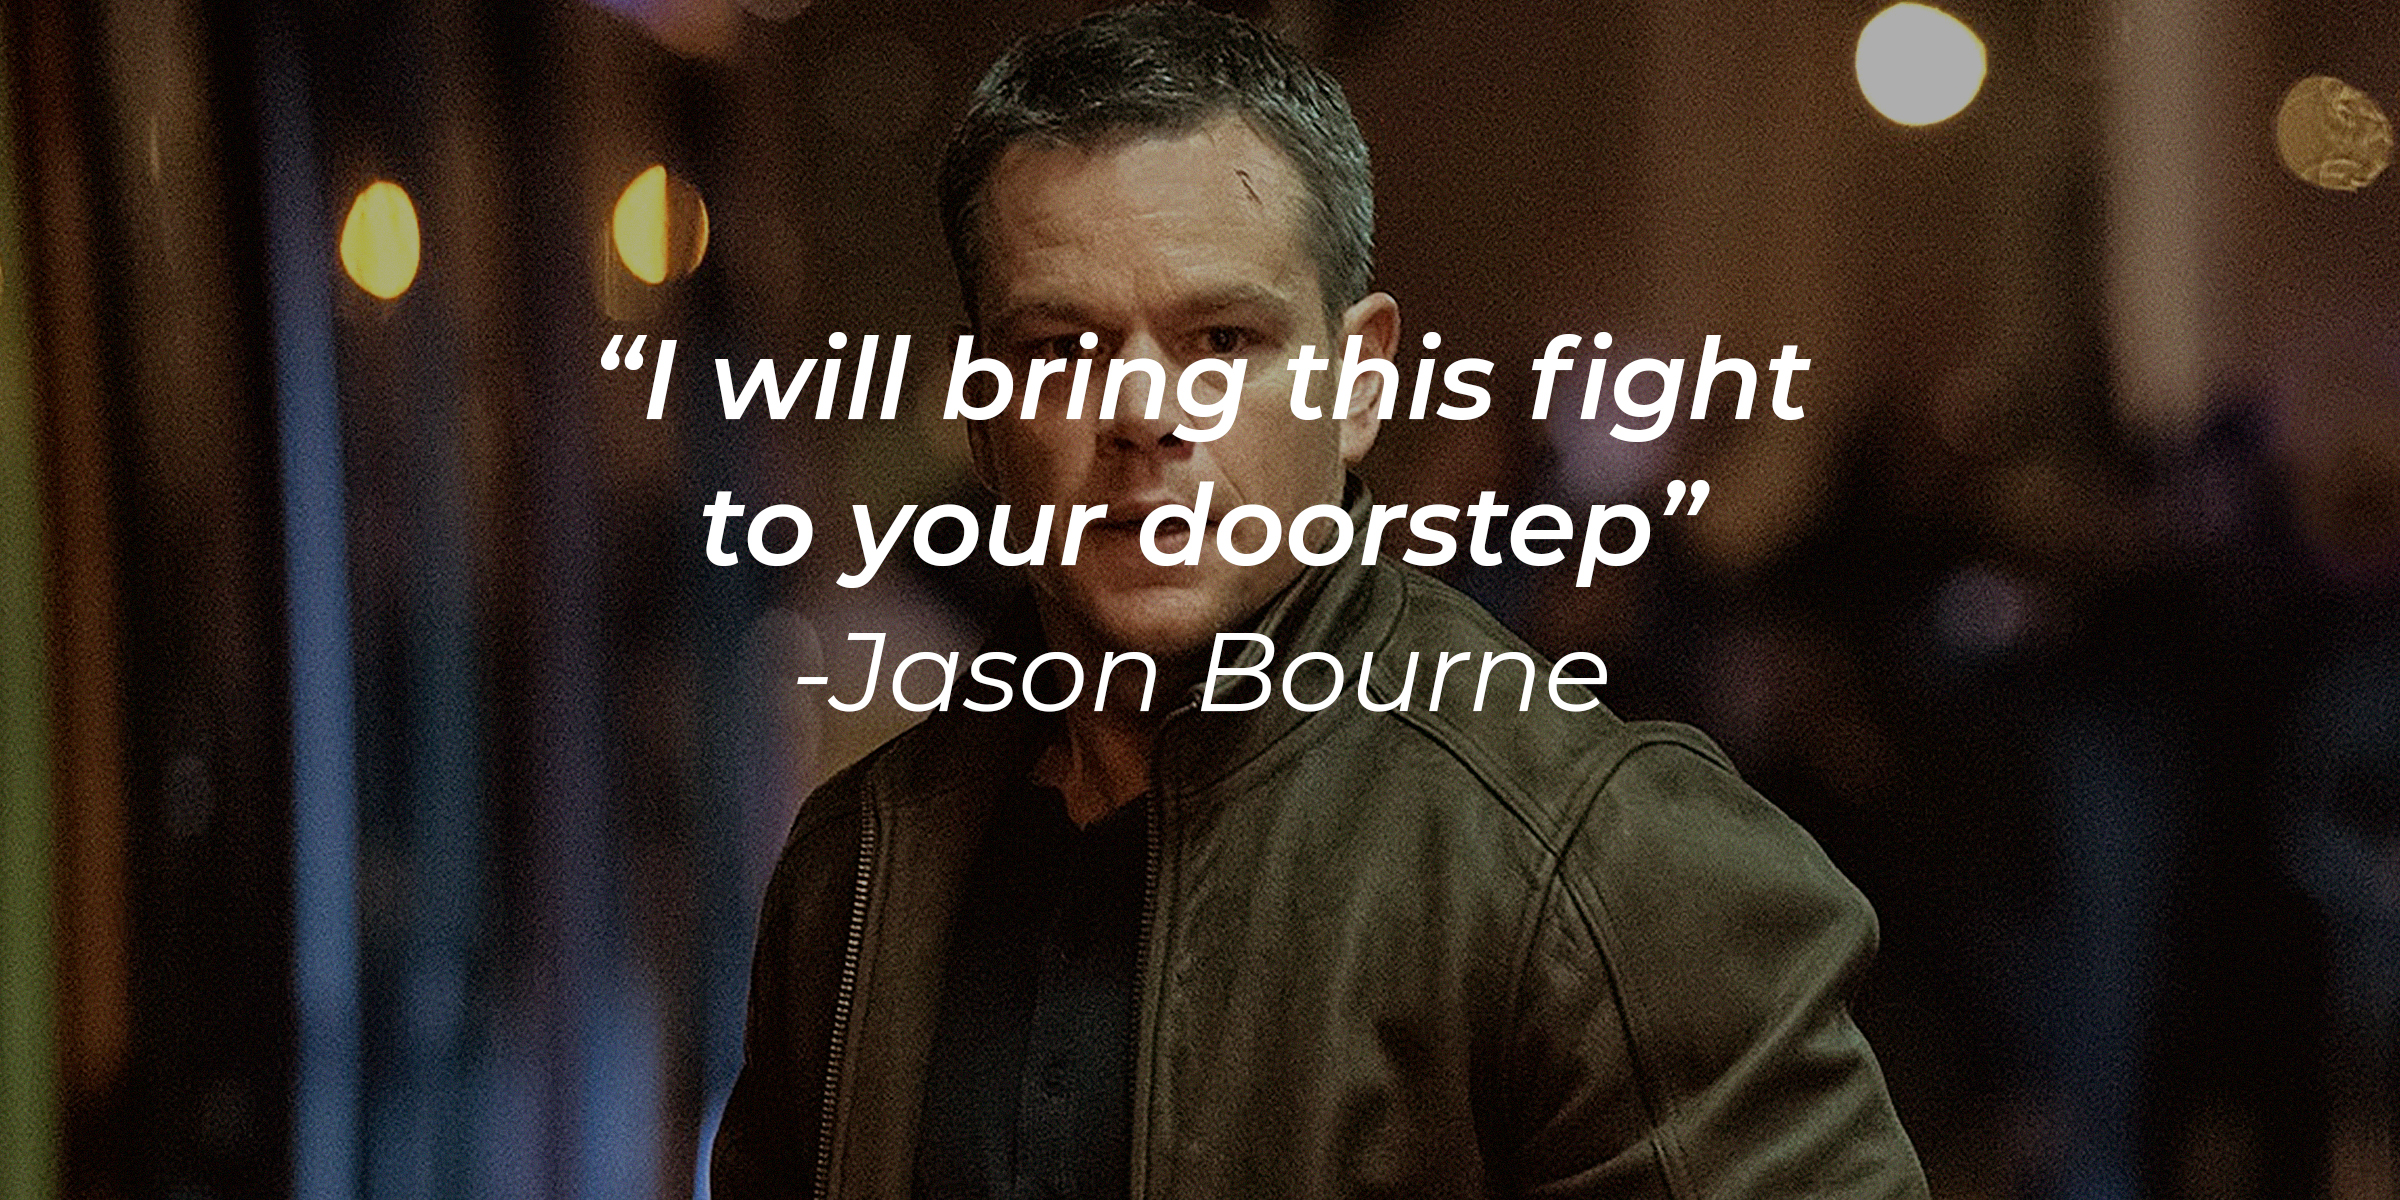 A picture of Jason Bourne with the quote, "I will bring this fight to your doorstep" | Source: facebook.com/TheBourneSeries